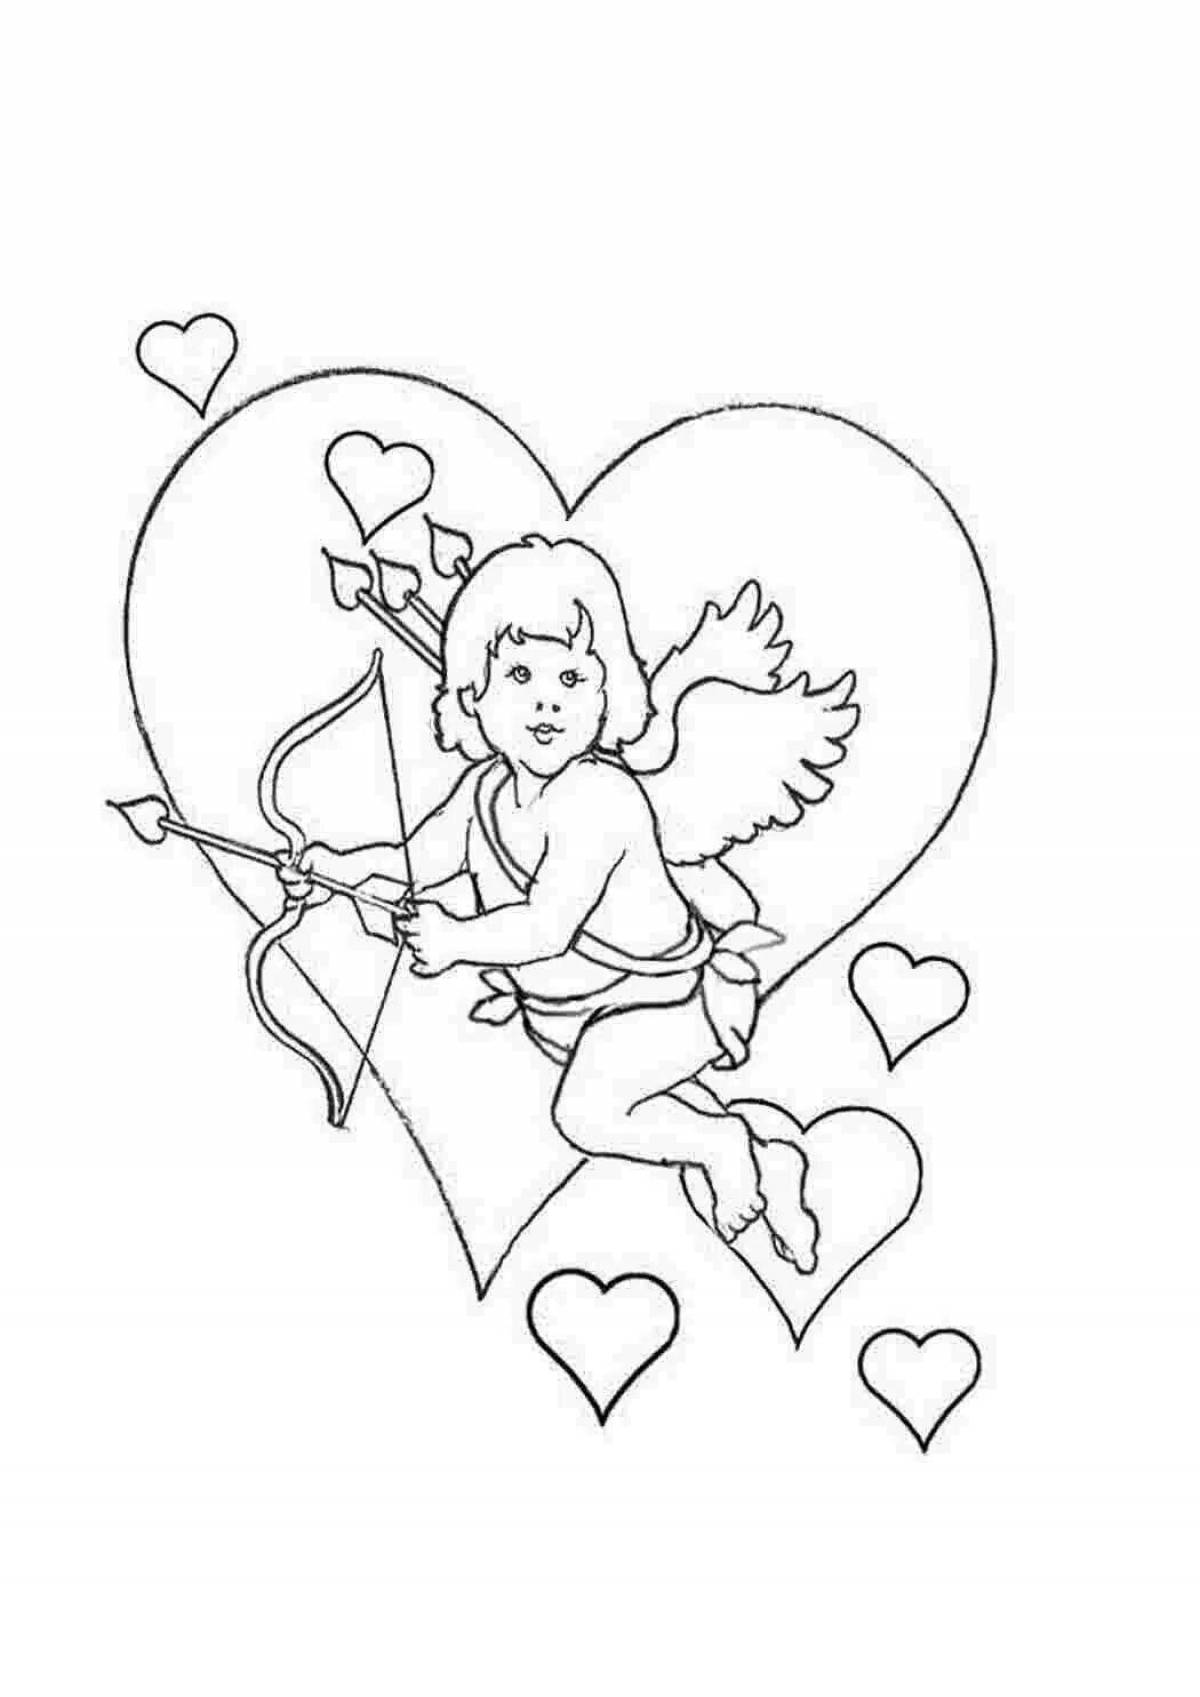 Cute cupid with heart coloring book